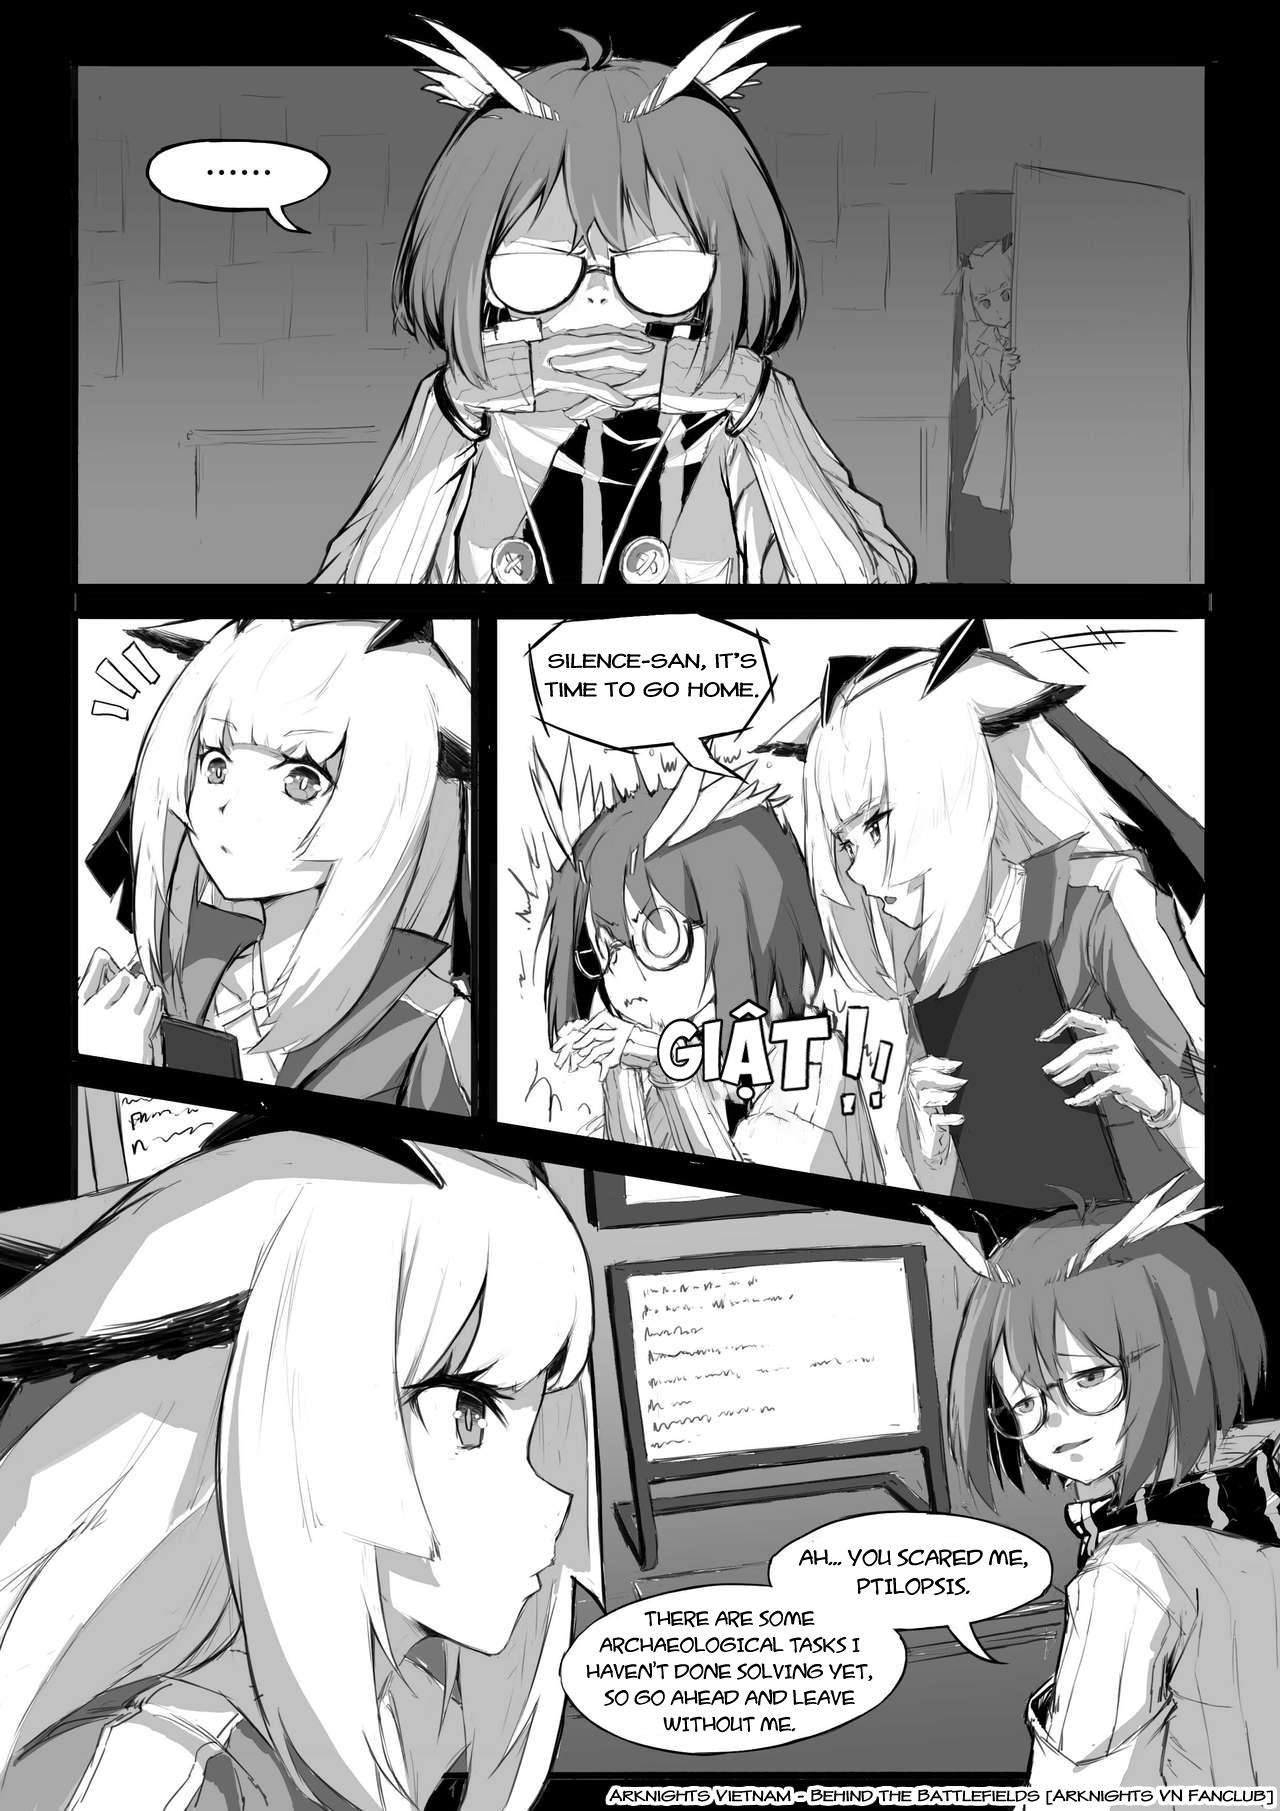 Mamada The Story Where Ptilopsis Becomes A Very Little Girl - Arknights Kitchen - Page 2